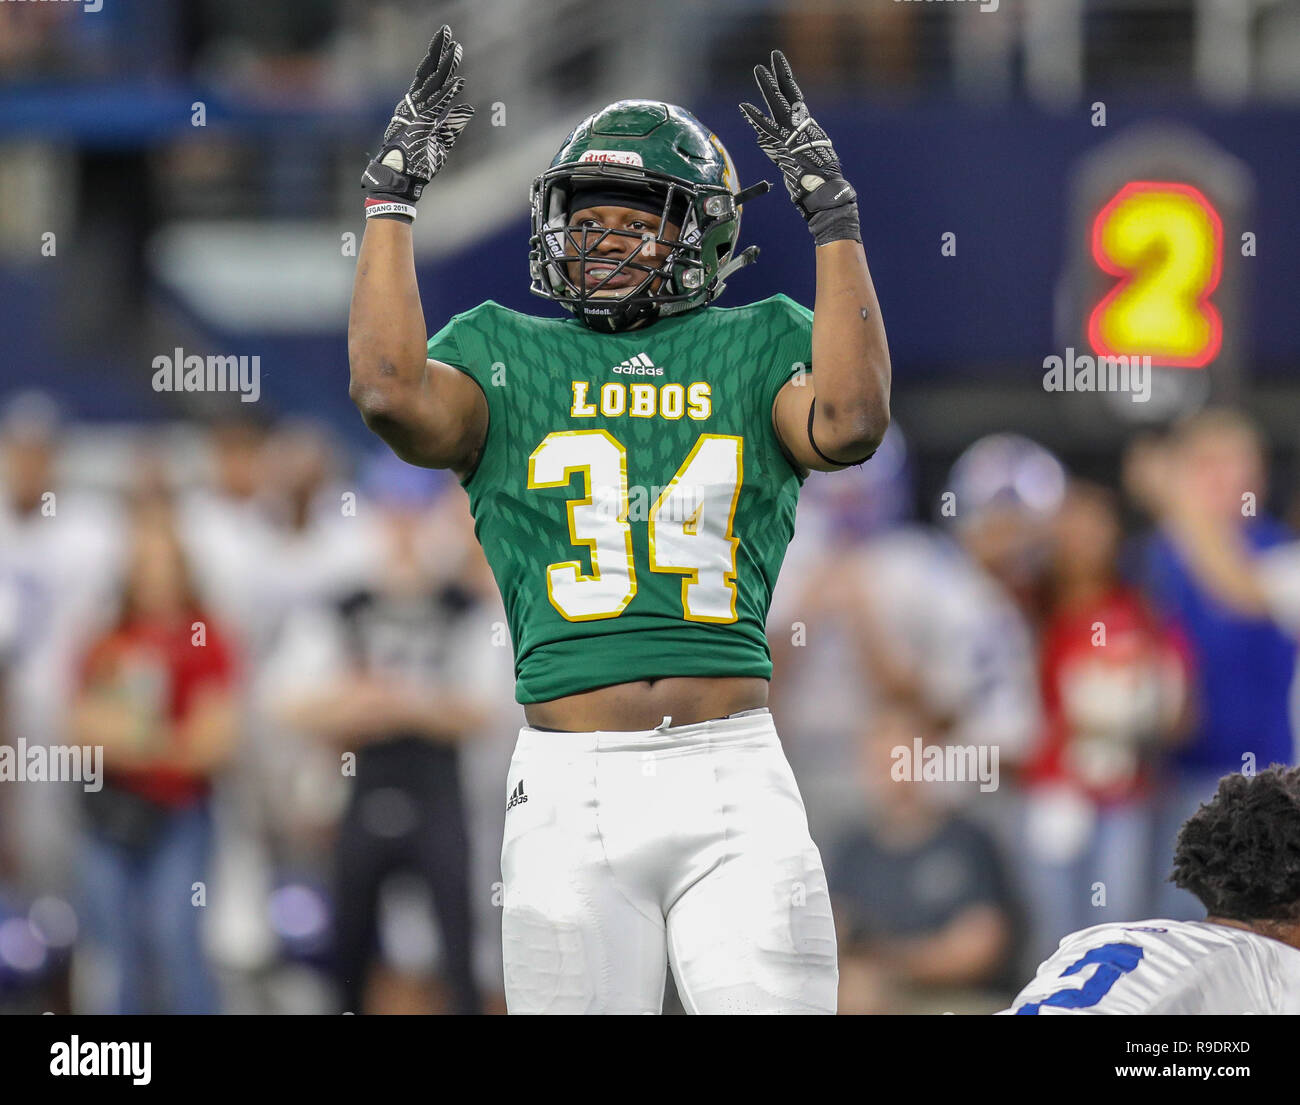 Arlington, Texas, USA. 12th Dec, 2018. Lonview's Tyshawn Taylor #34 celebrates sacking the West Brook QB during the UIL Texas 6A D2 state championship football game between the Longview Lobos and the West Brook Bruins at AT&T Stadium in Arlington, Texas. Kyle Okita/CSM/Alamy Live News Stock Photo